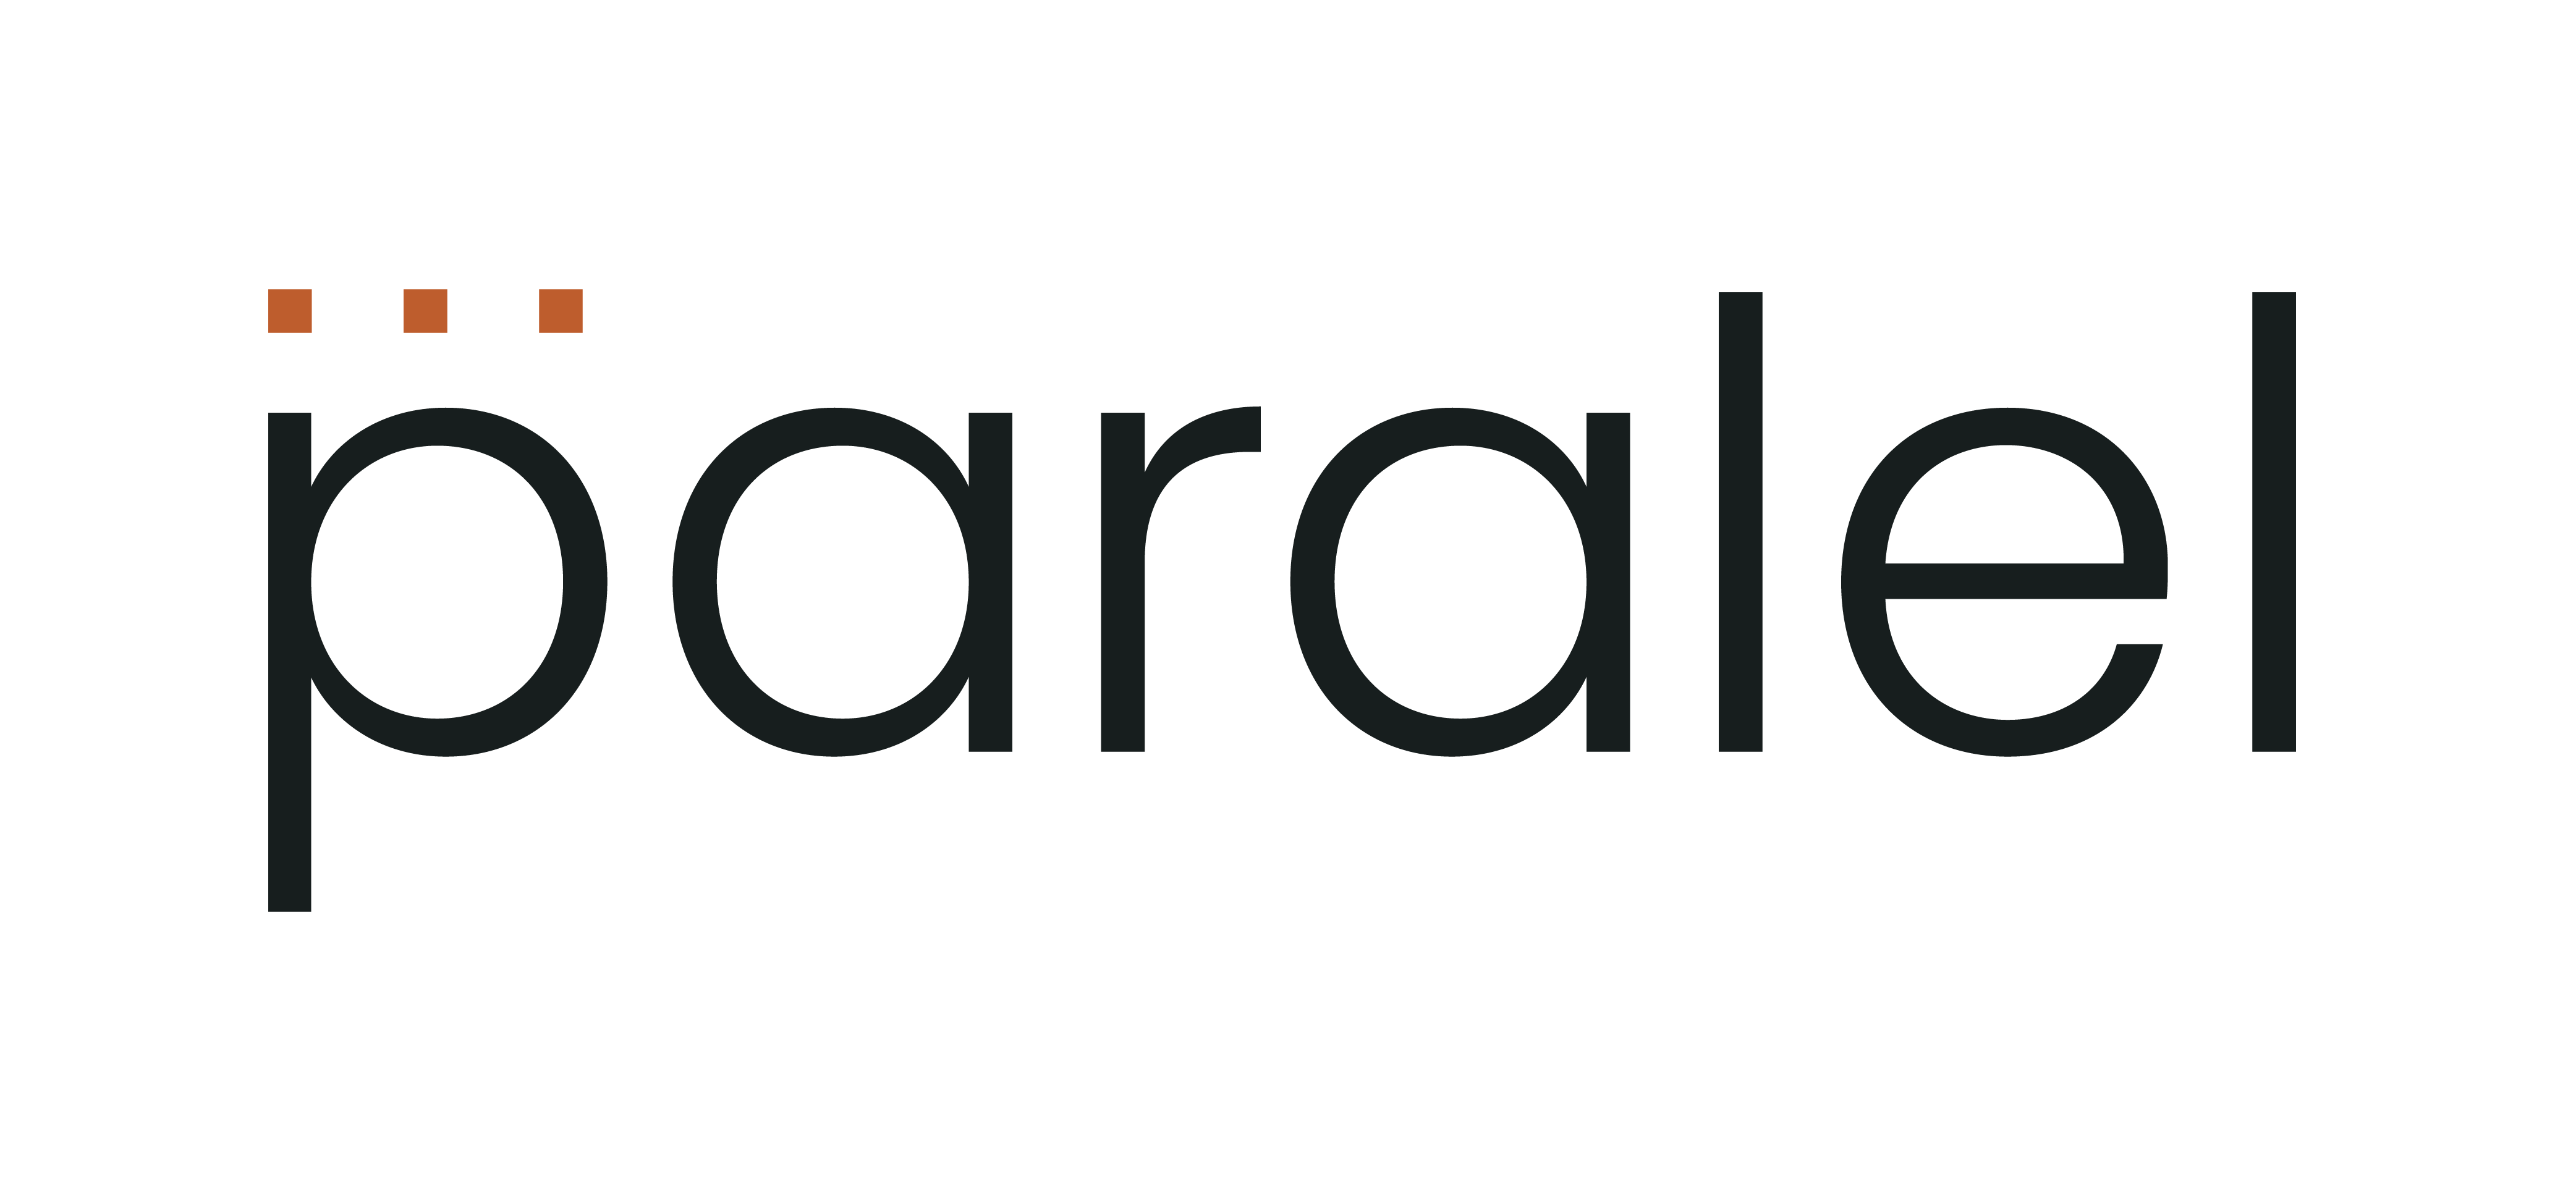 Paralel Technologies, Thursday, January 26, 2023, Press release picture